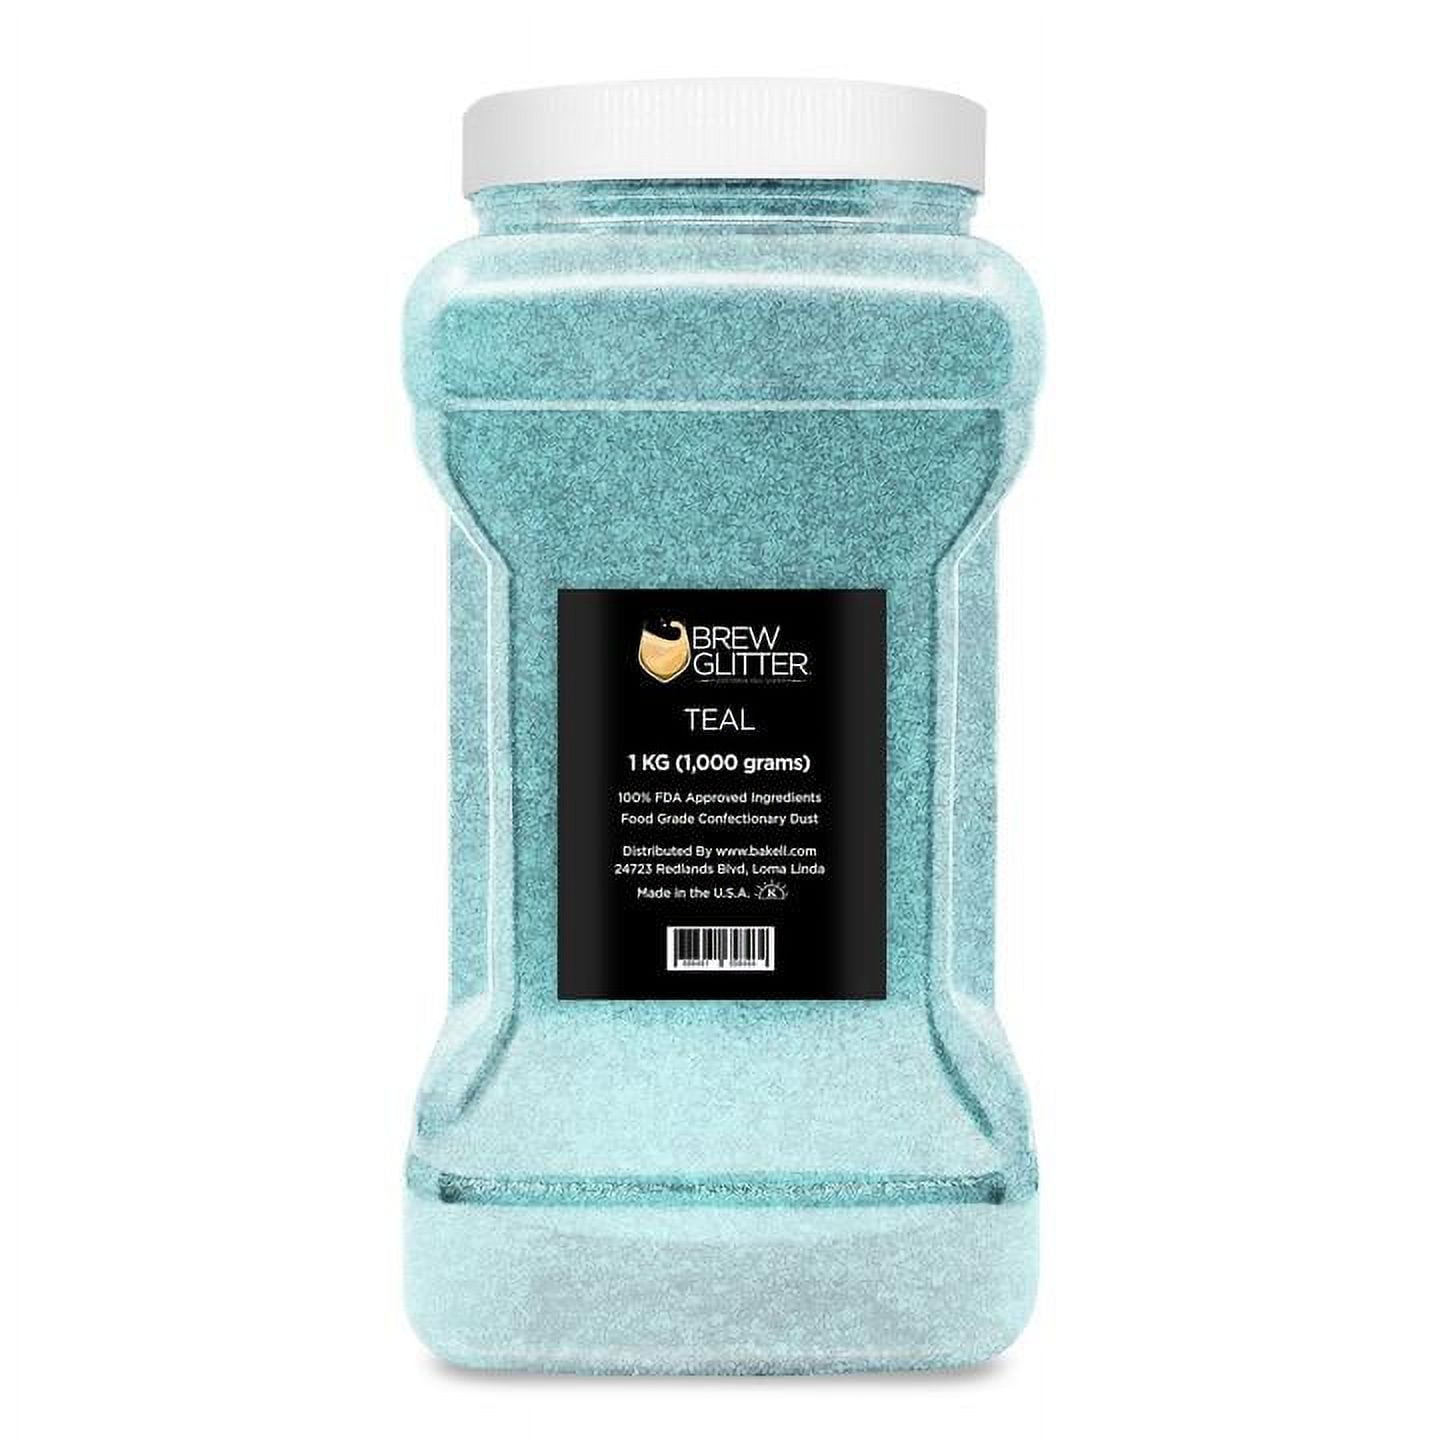 Sulyn Extra Fine Glitter for Crafts, Emerald Green, 2.5 oz 